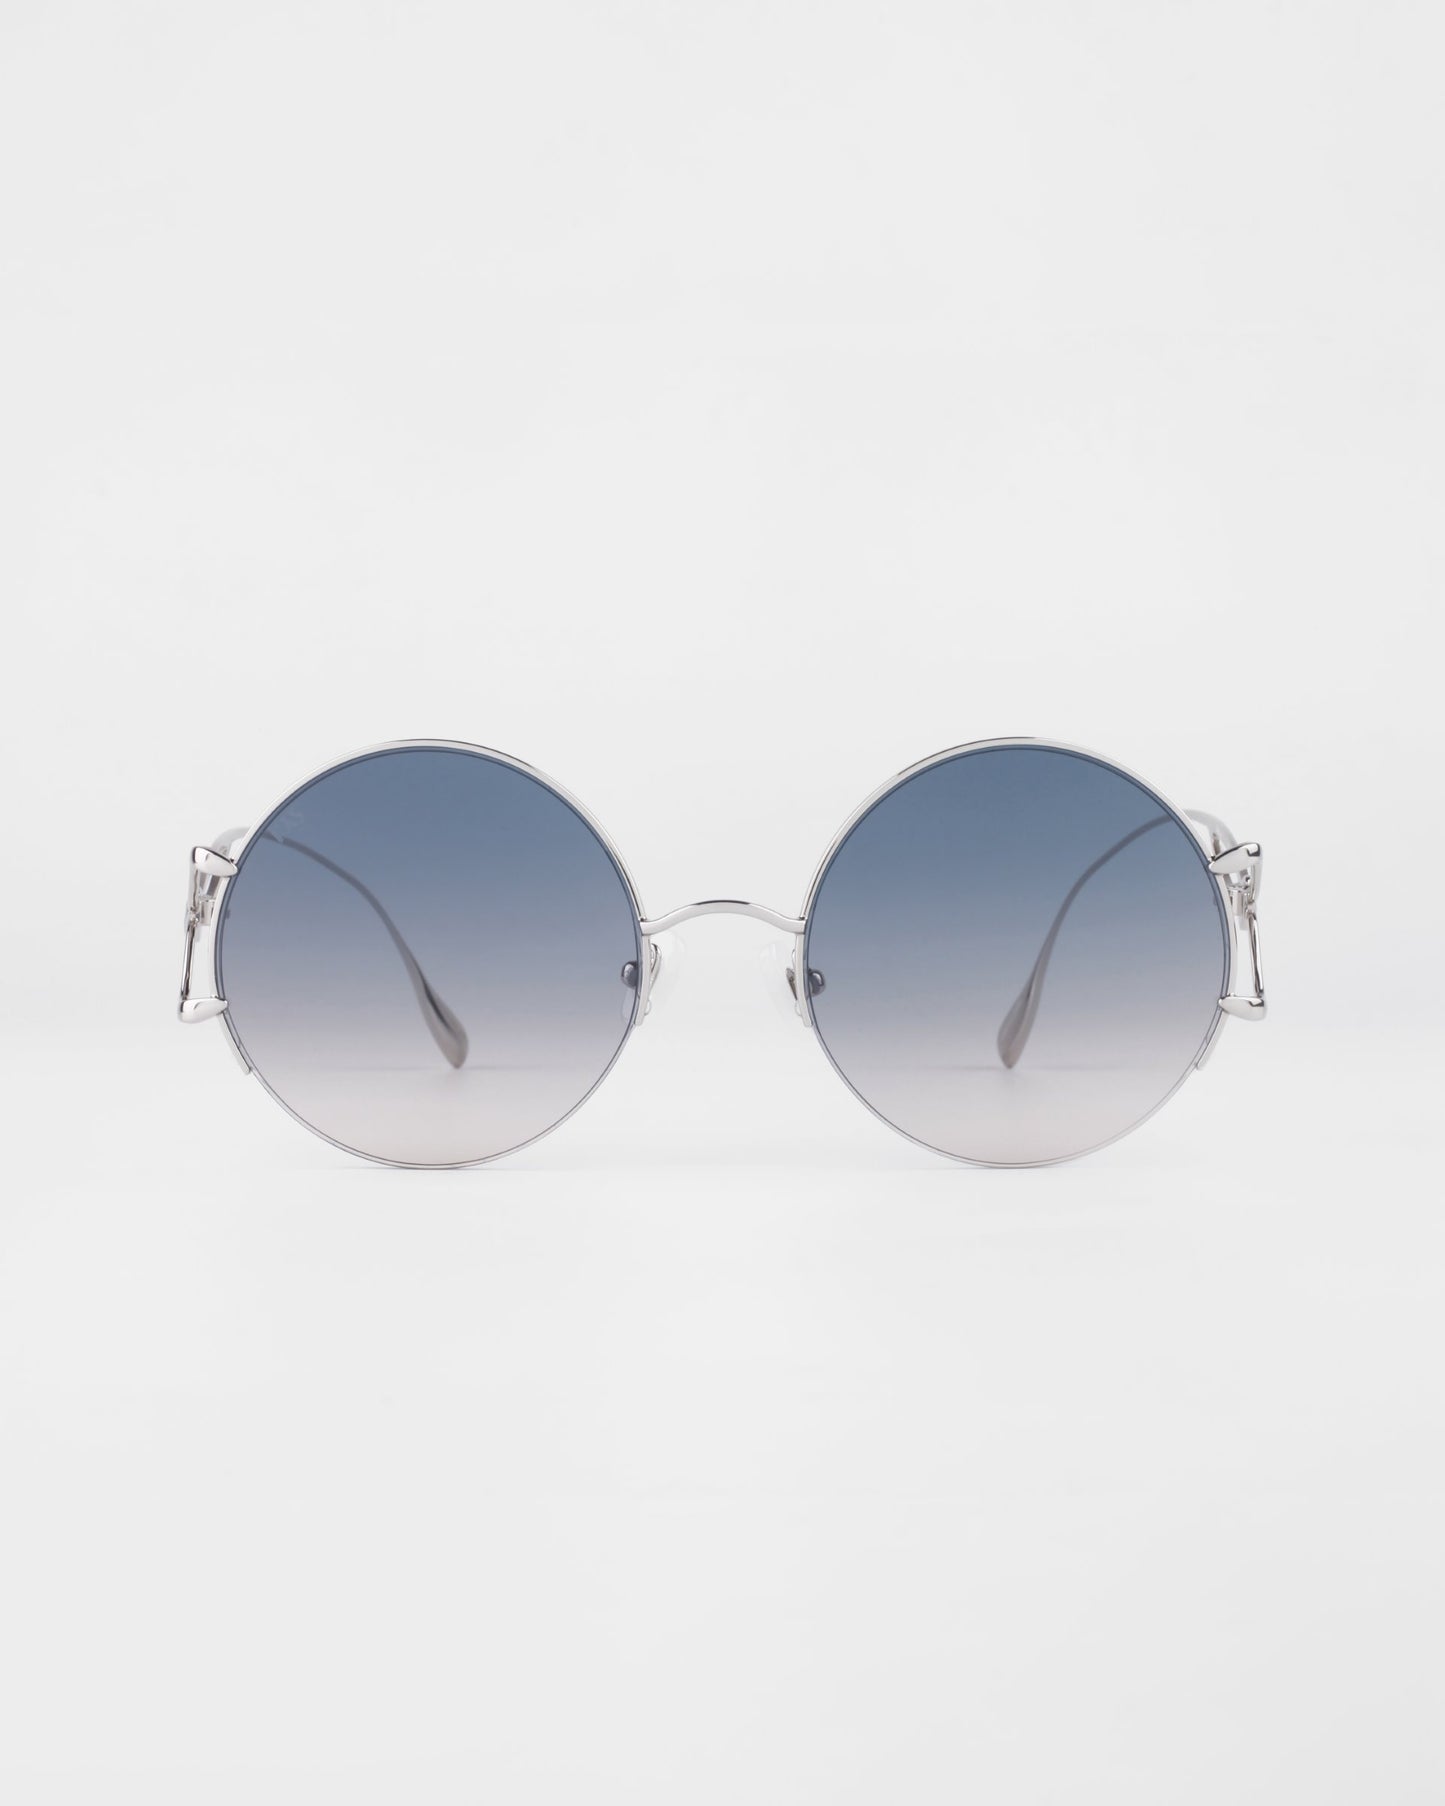 Diptych Sunglasses in Topaz. Front View. 